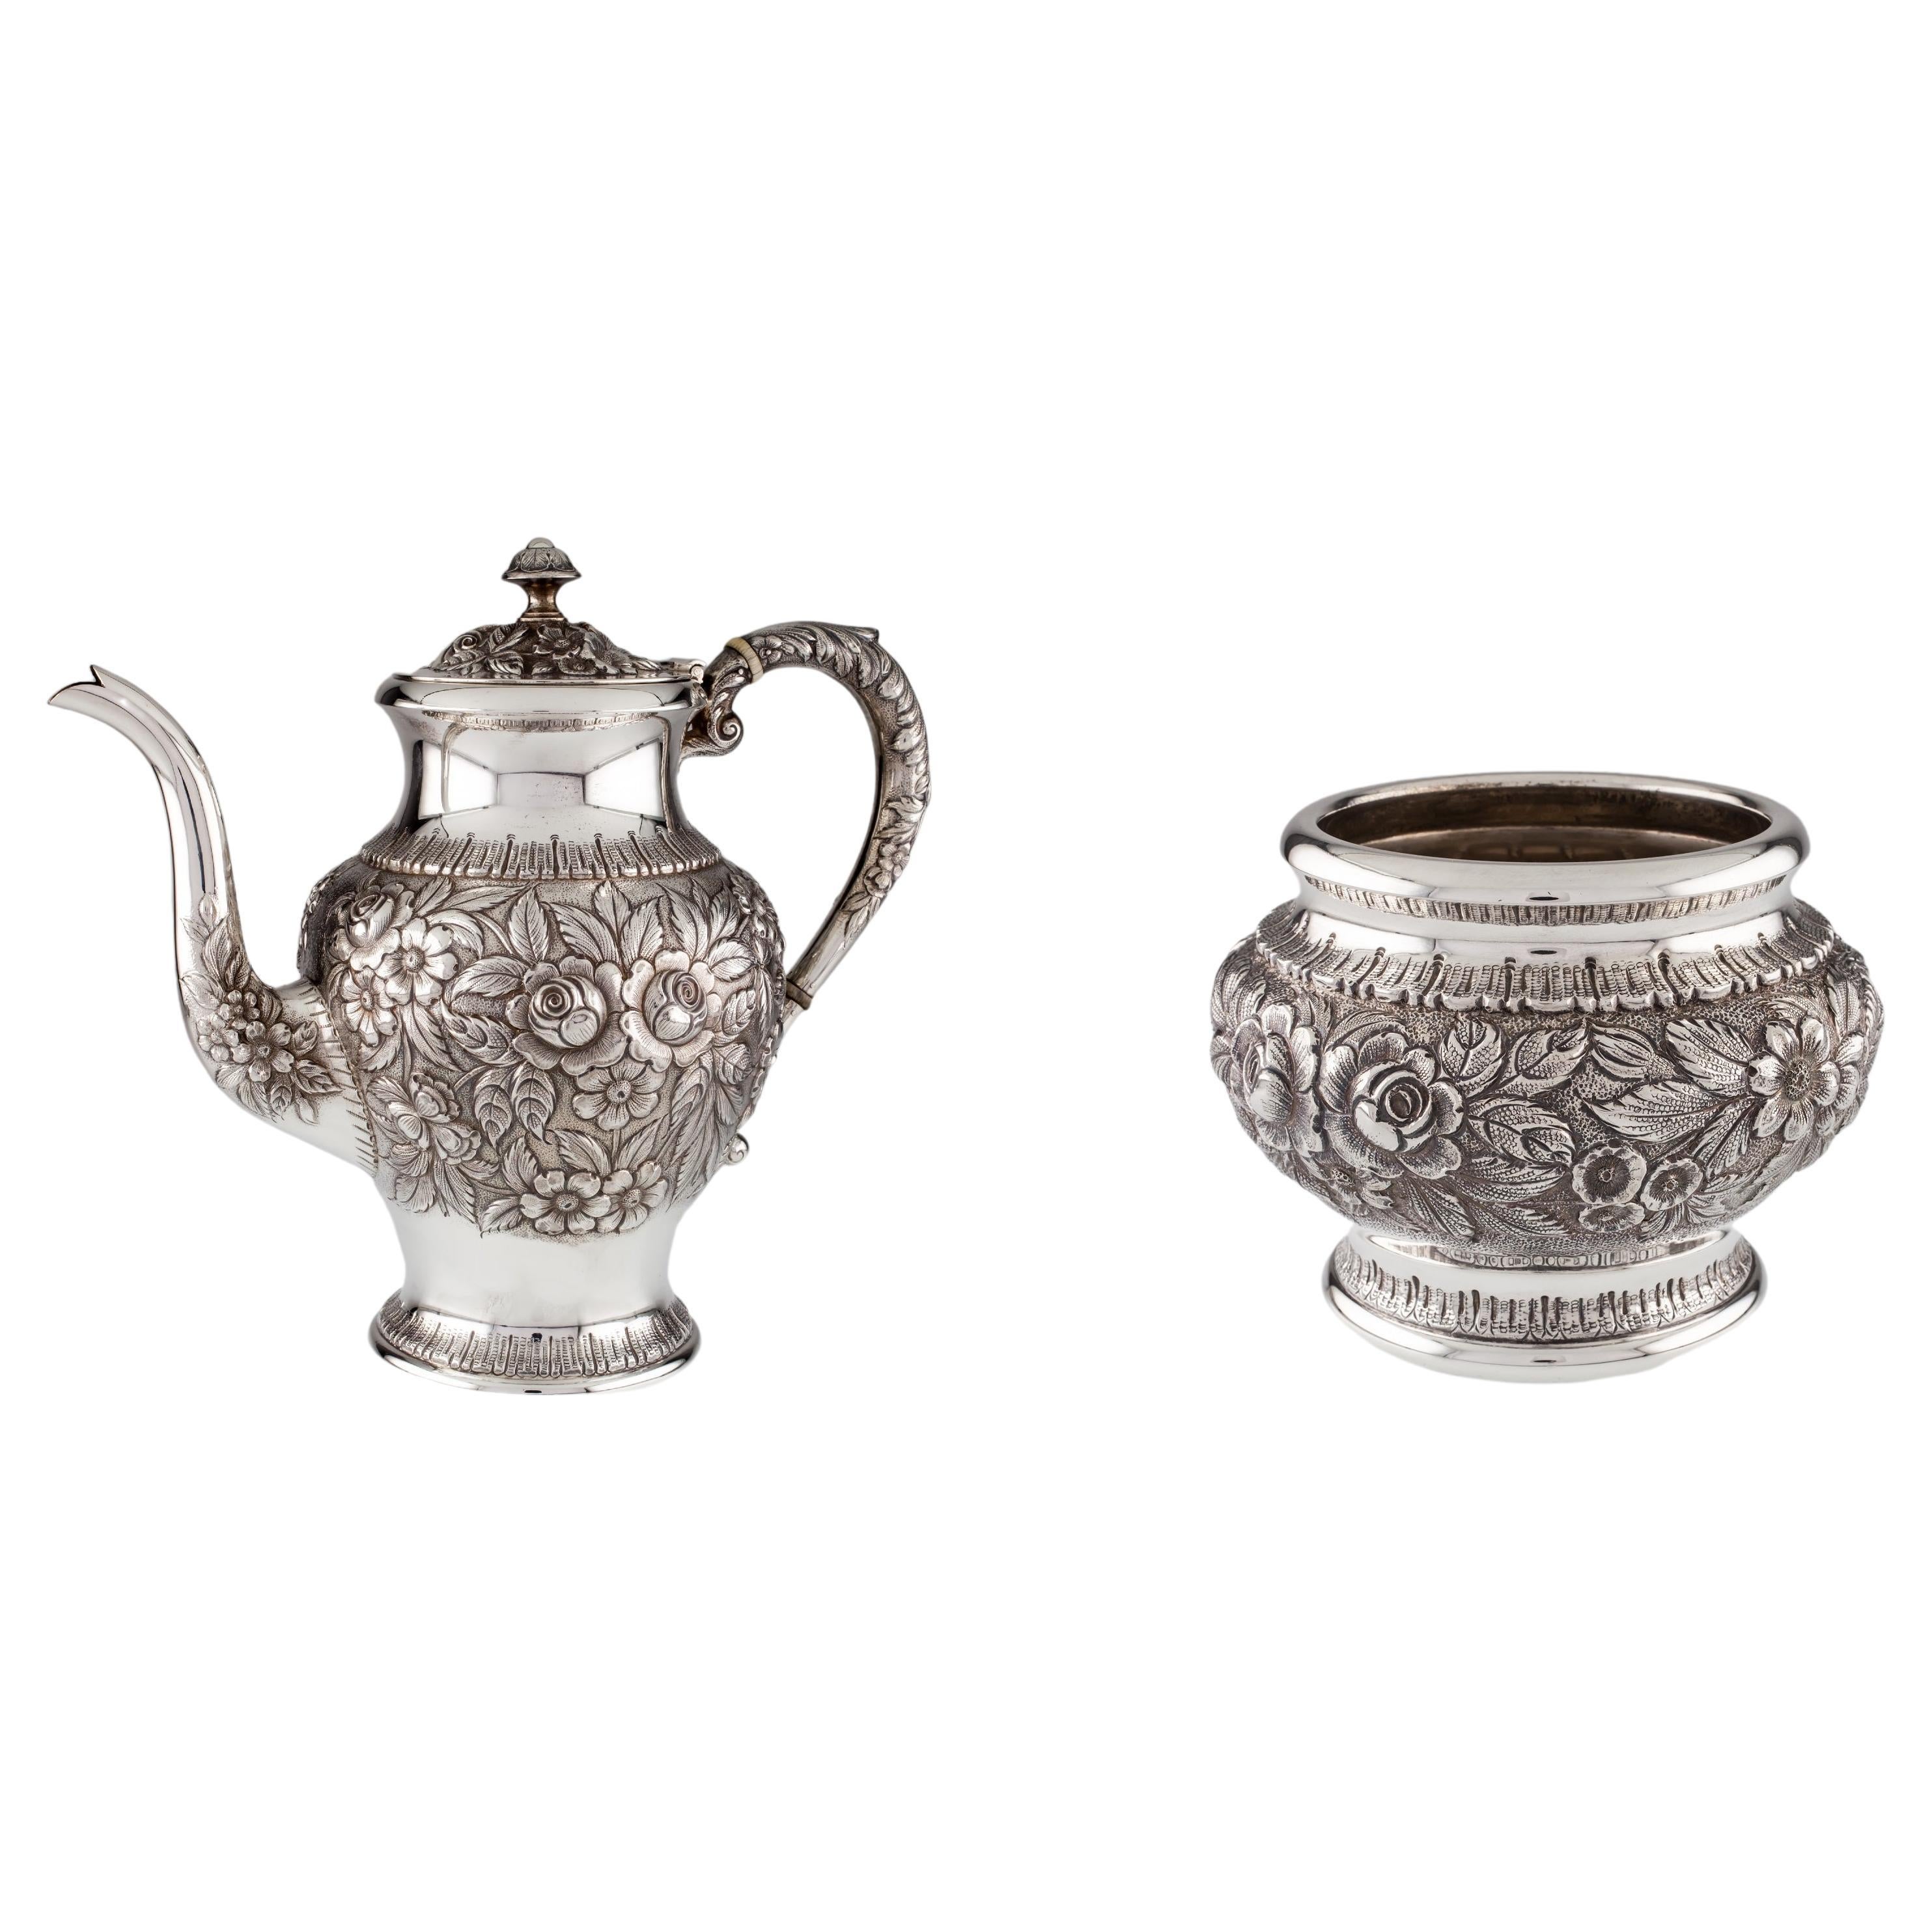 S Kirk & Son Sterling Silver Hand-Chased Repousse Tea Pot and Waste Bowl Set